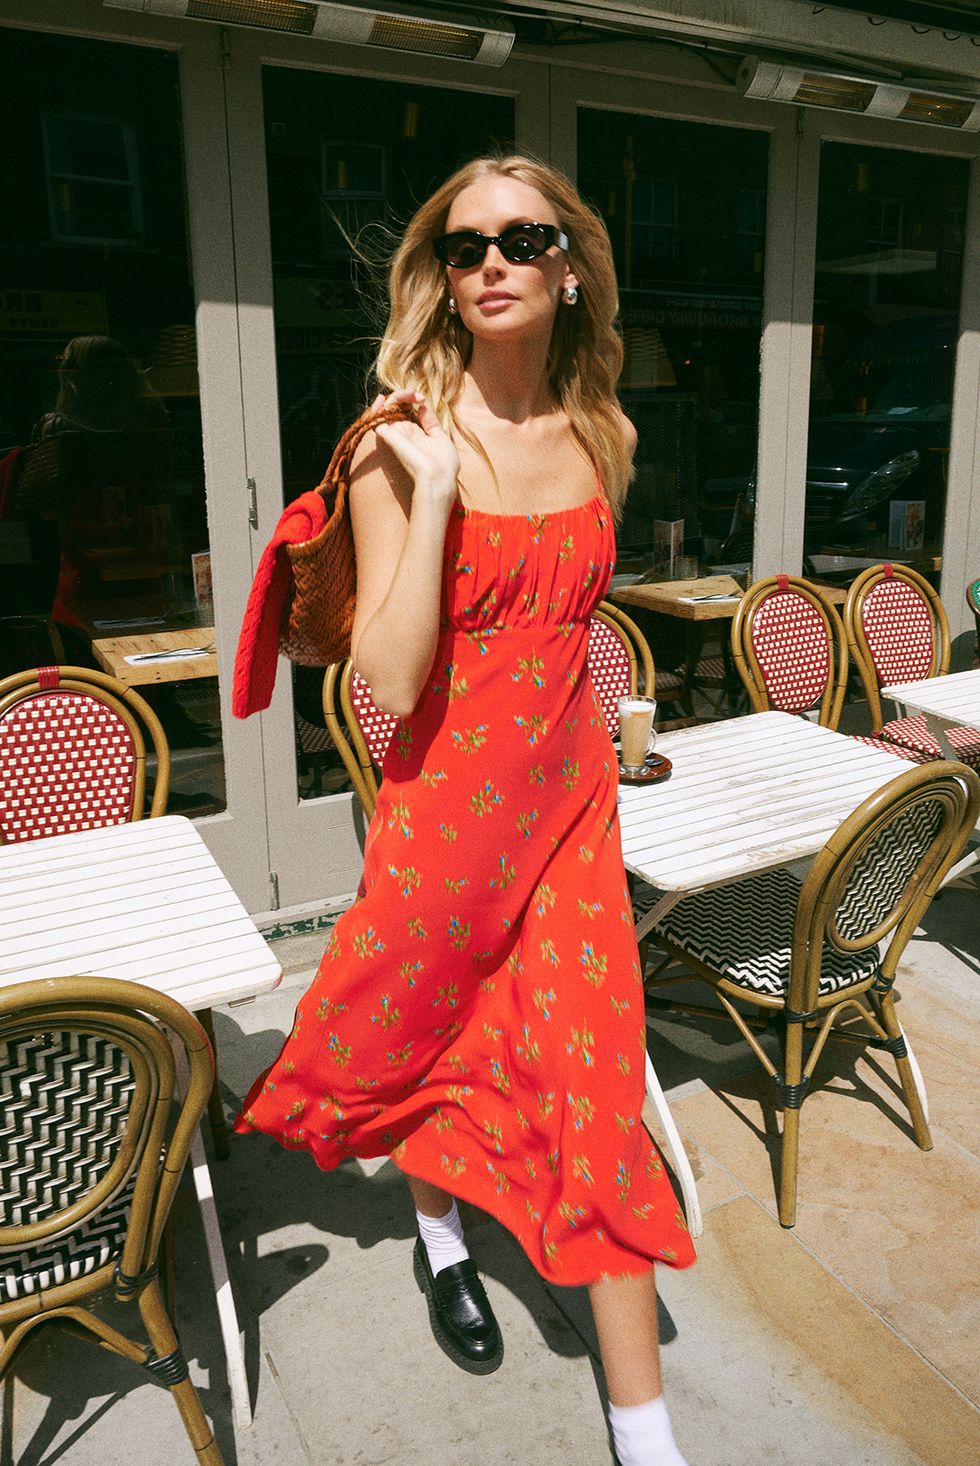 a woman wearing a red dress and sunglasses